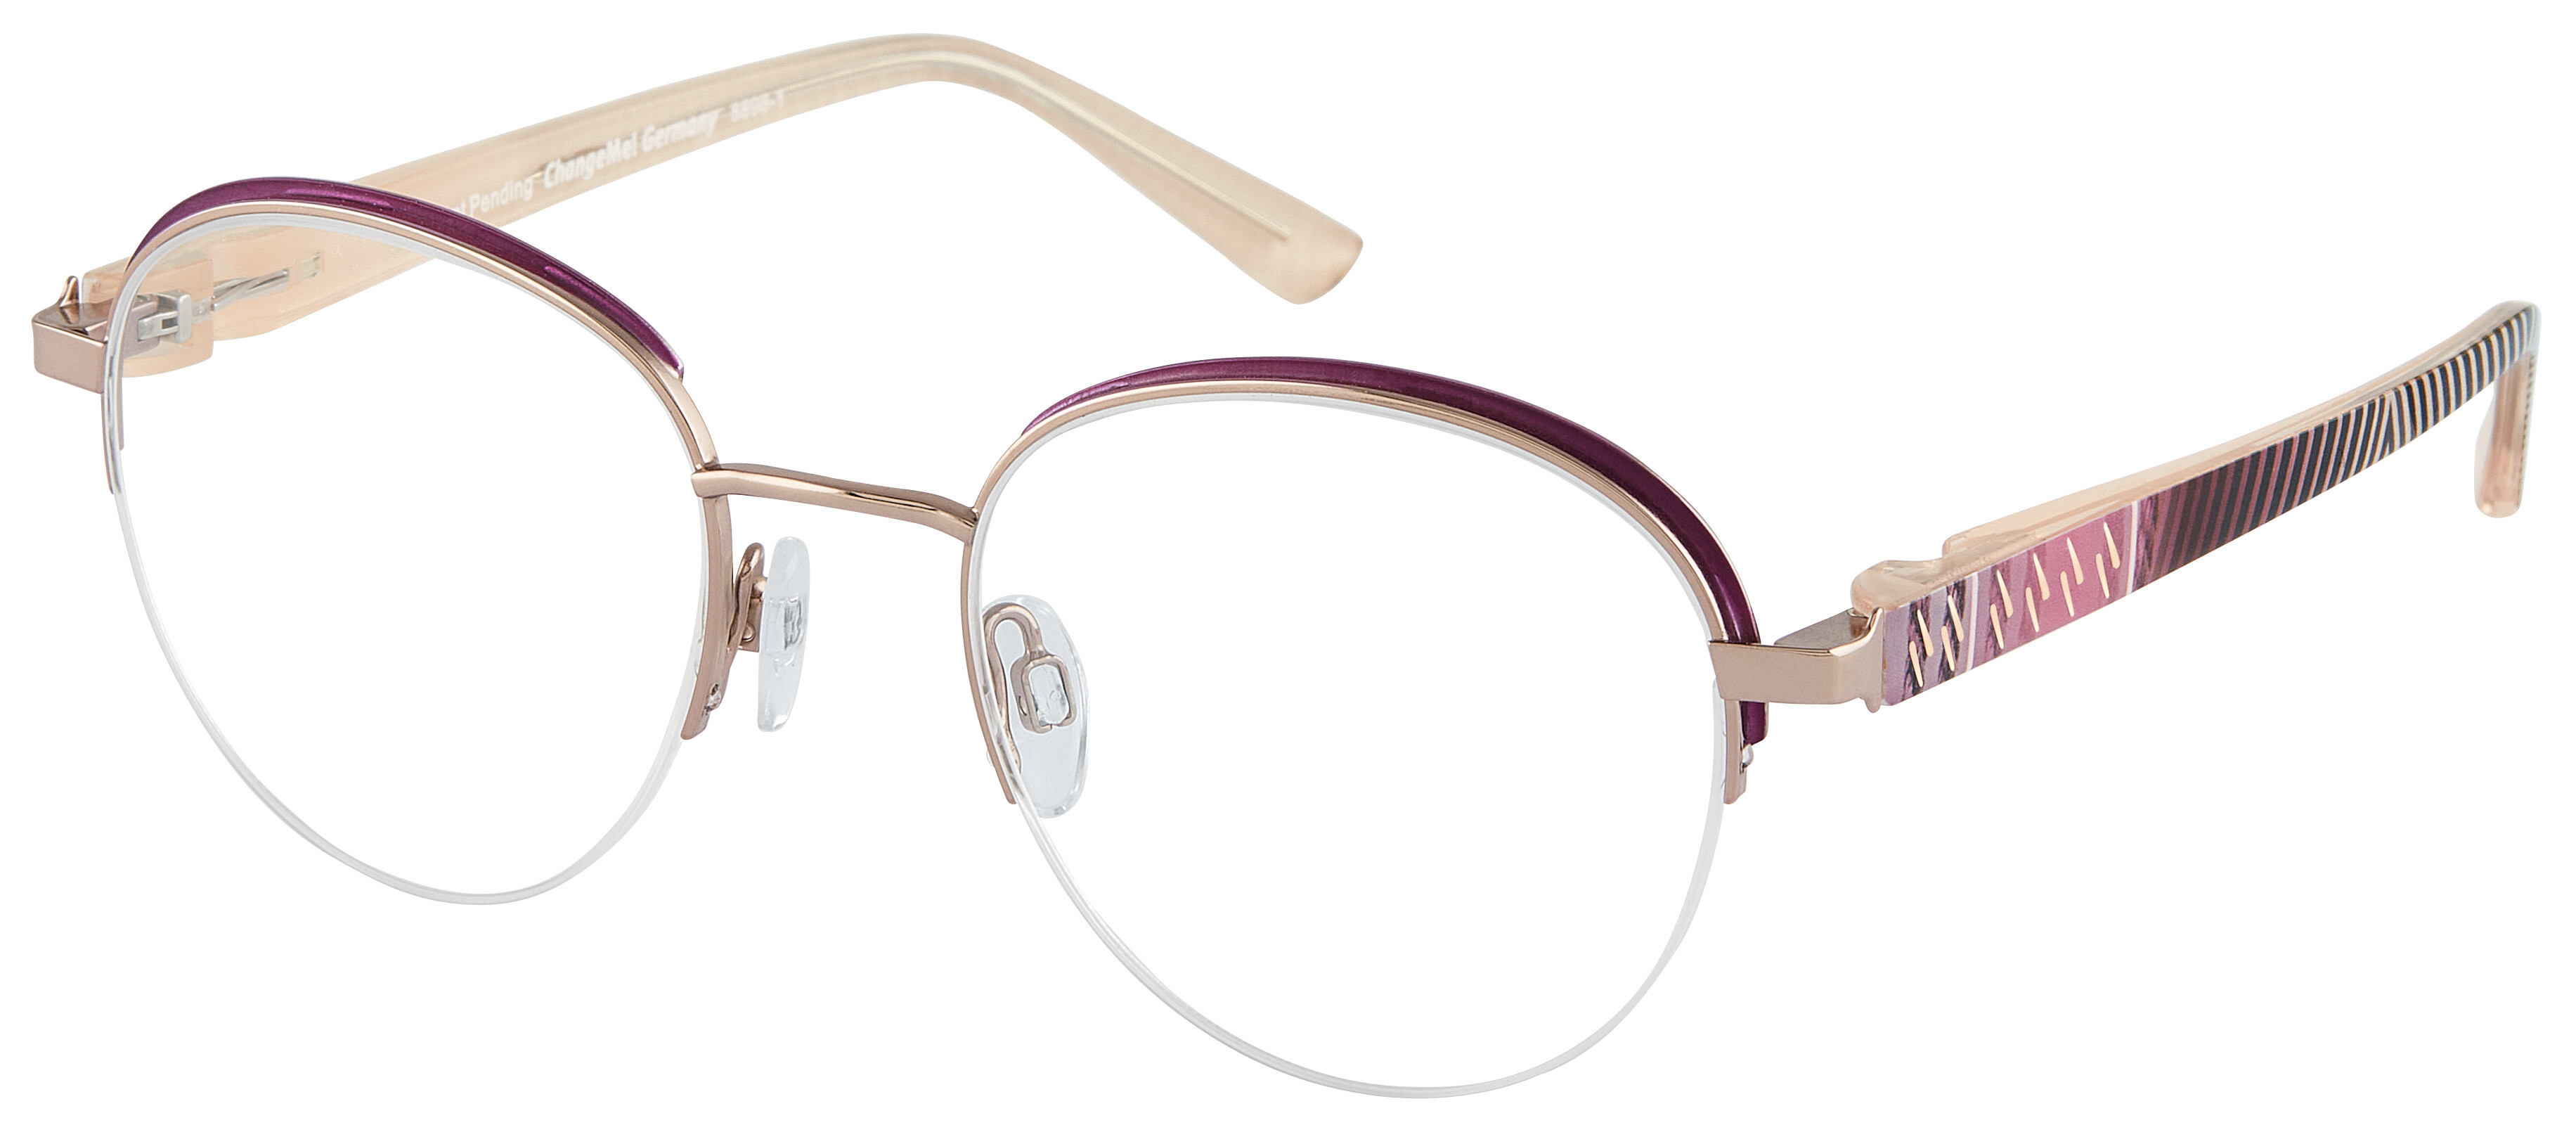 Angle_Left01 ChangeMe! 02642 002 Brille Pink Gold, Lila